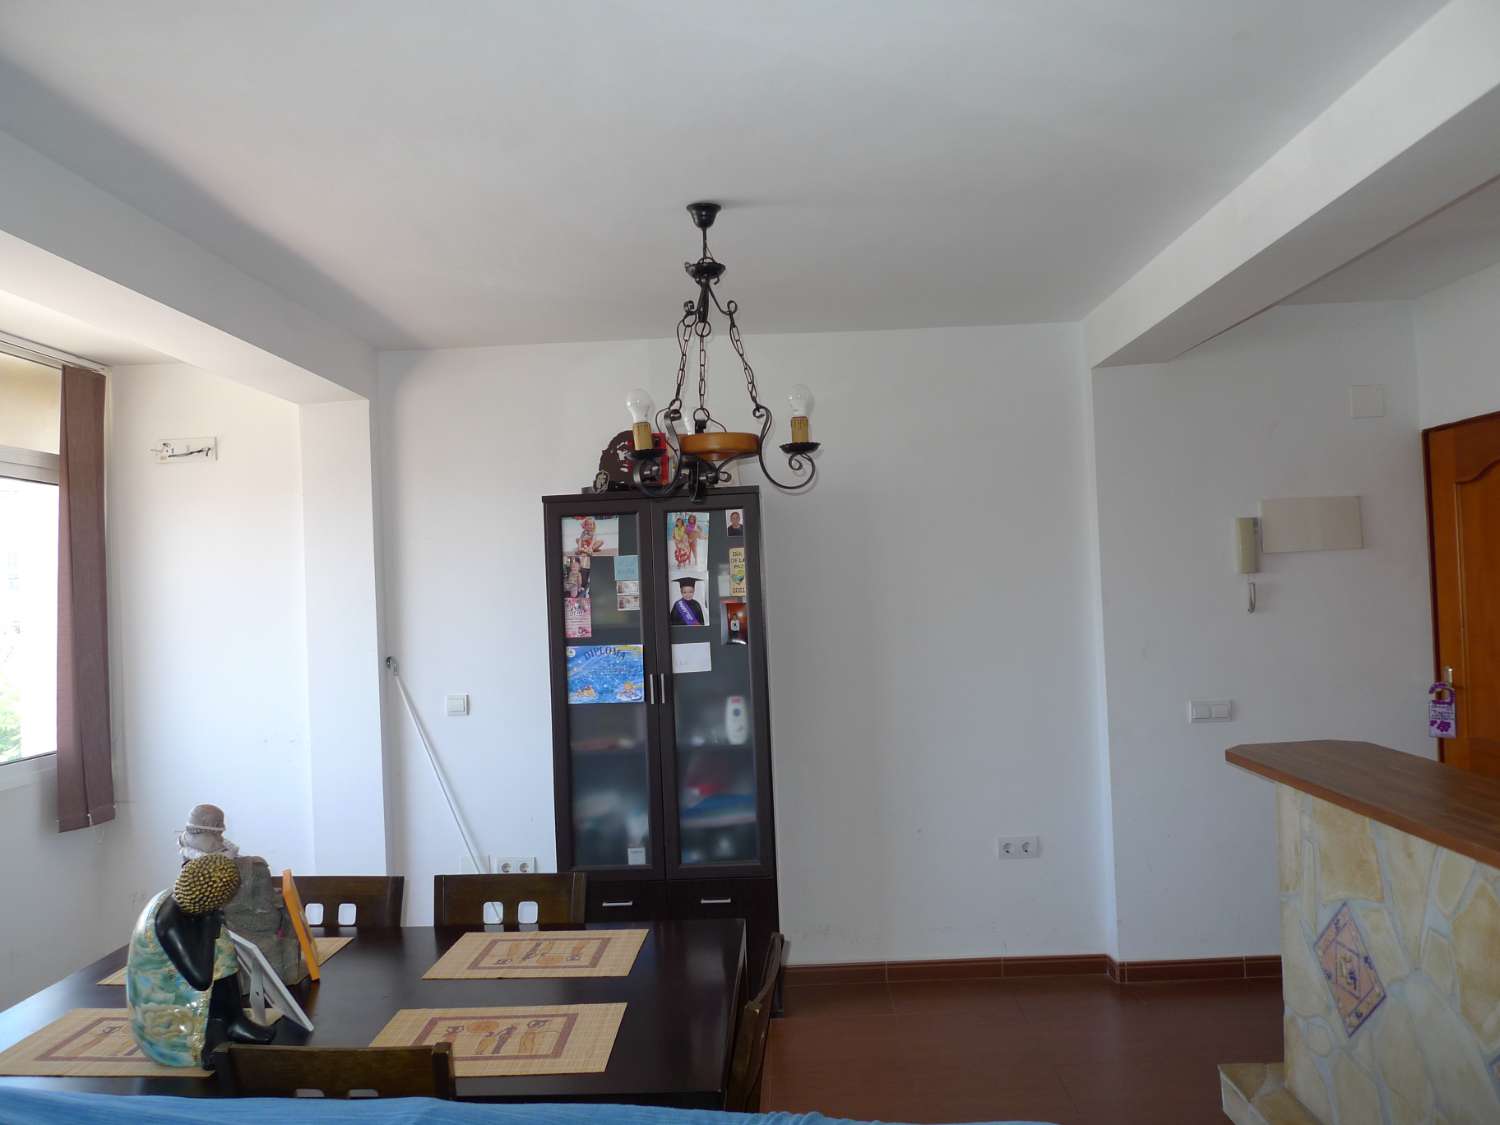 3-bedroom apartment for sale in the old town of Nerja